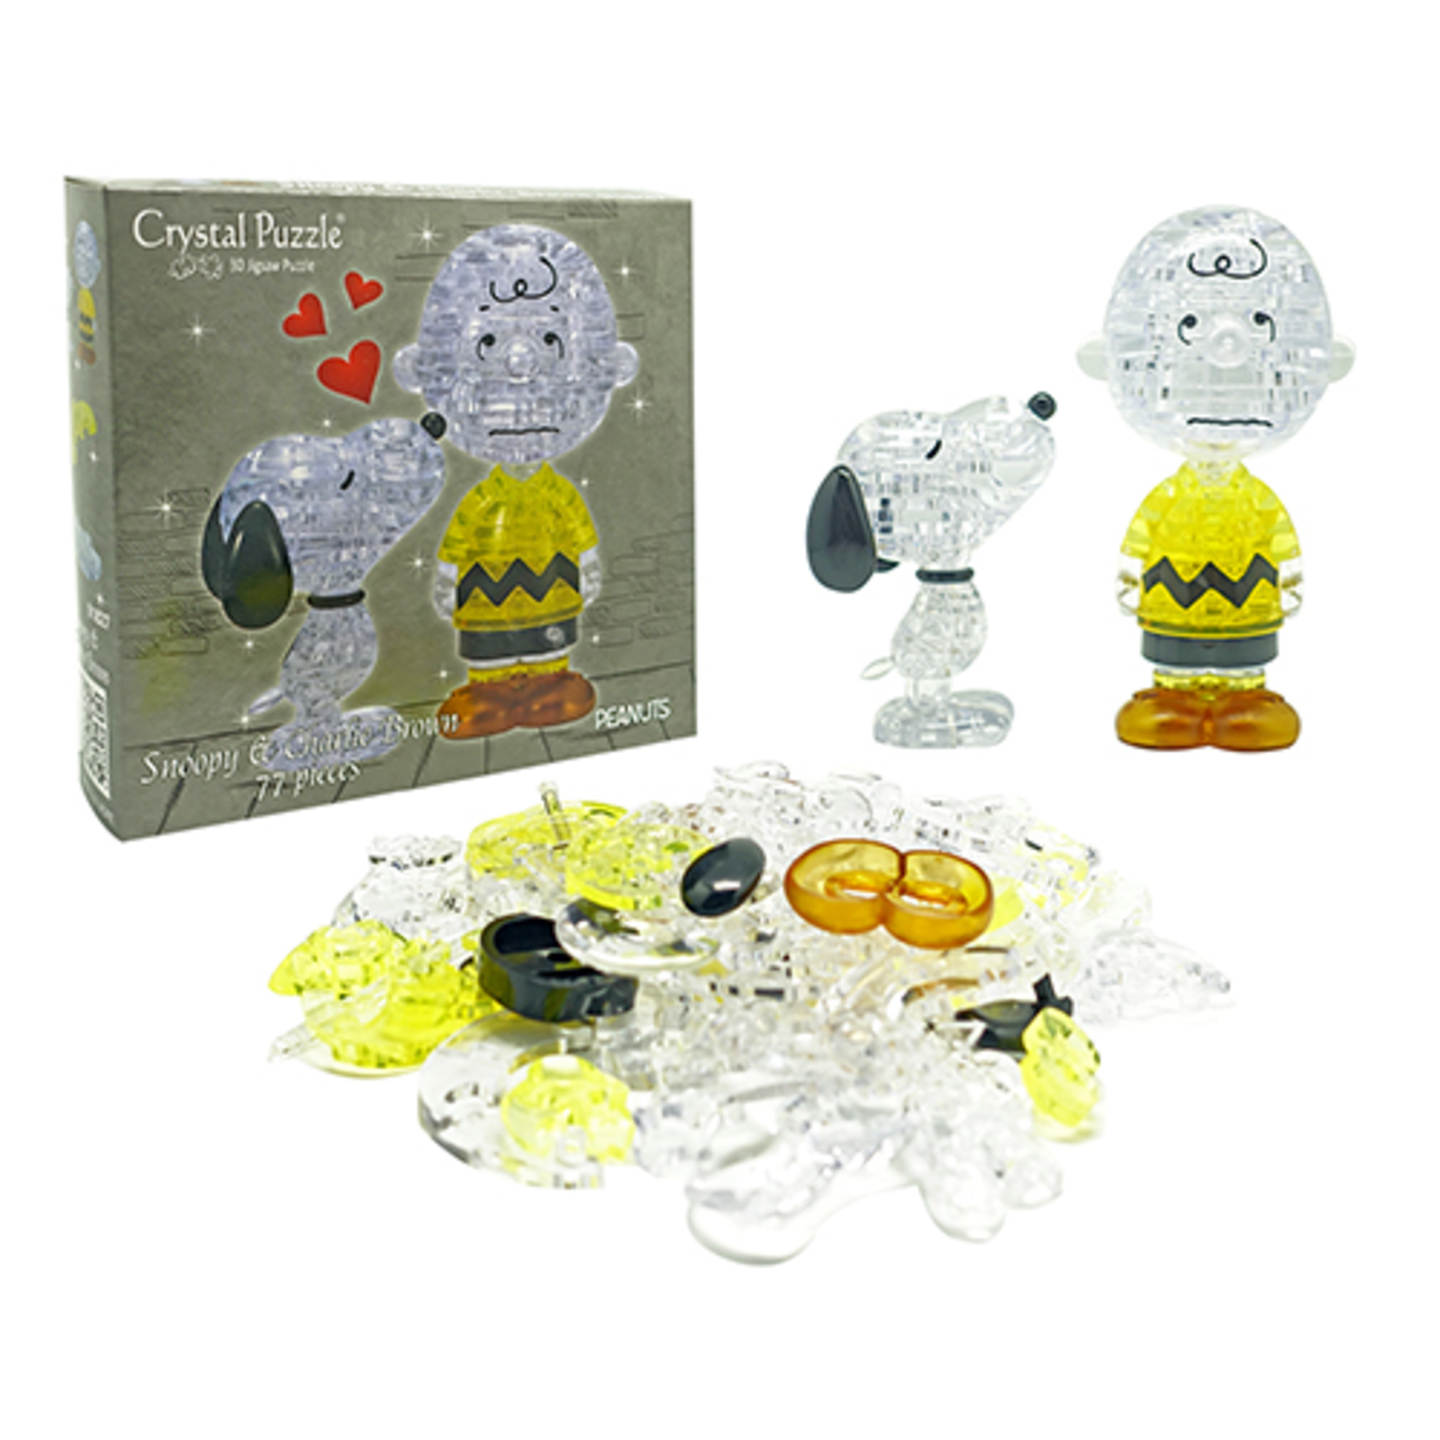 Jigsaw Puzzle Play N Learn 3D Crystal Puzzle Snoopy and Charlie Brown